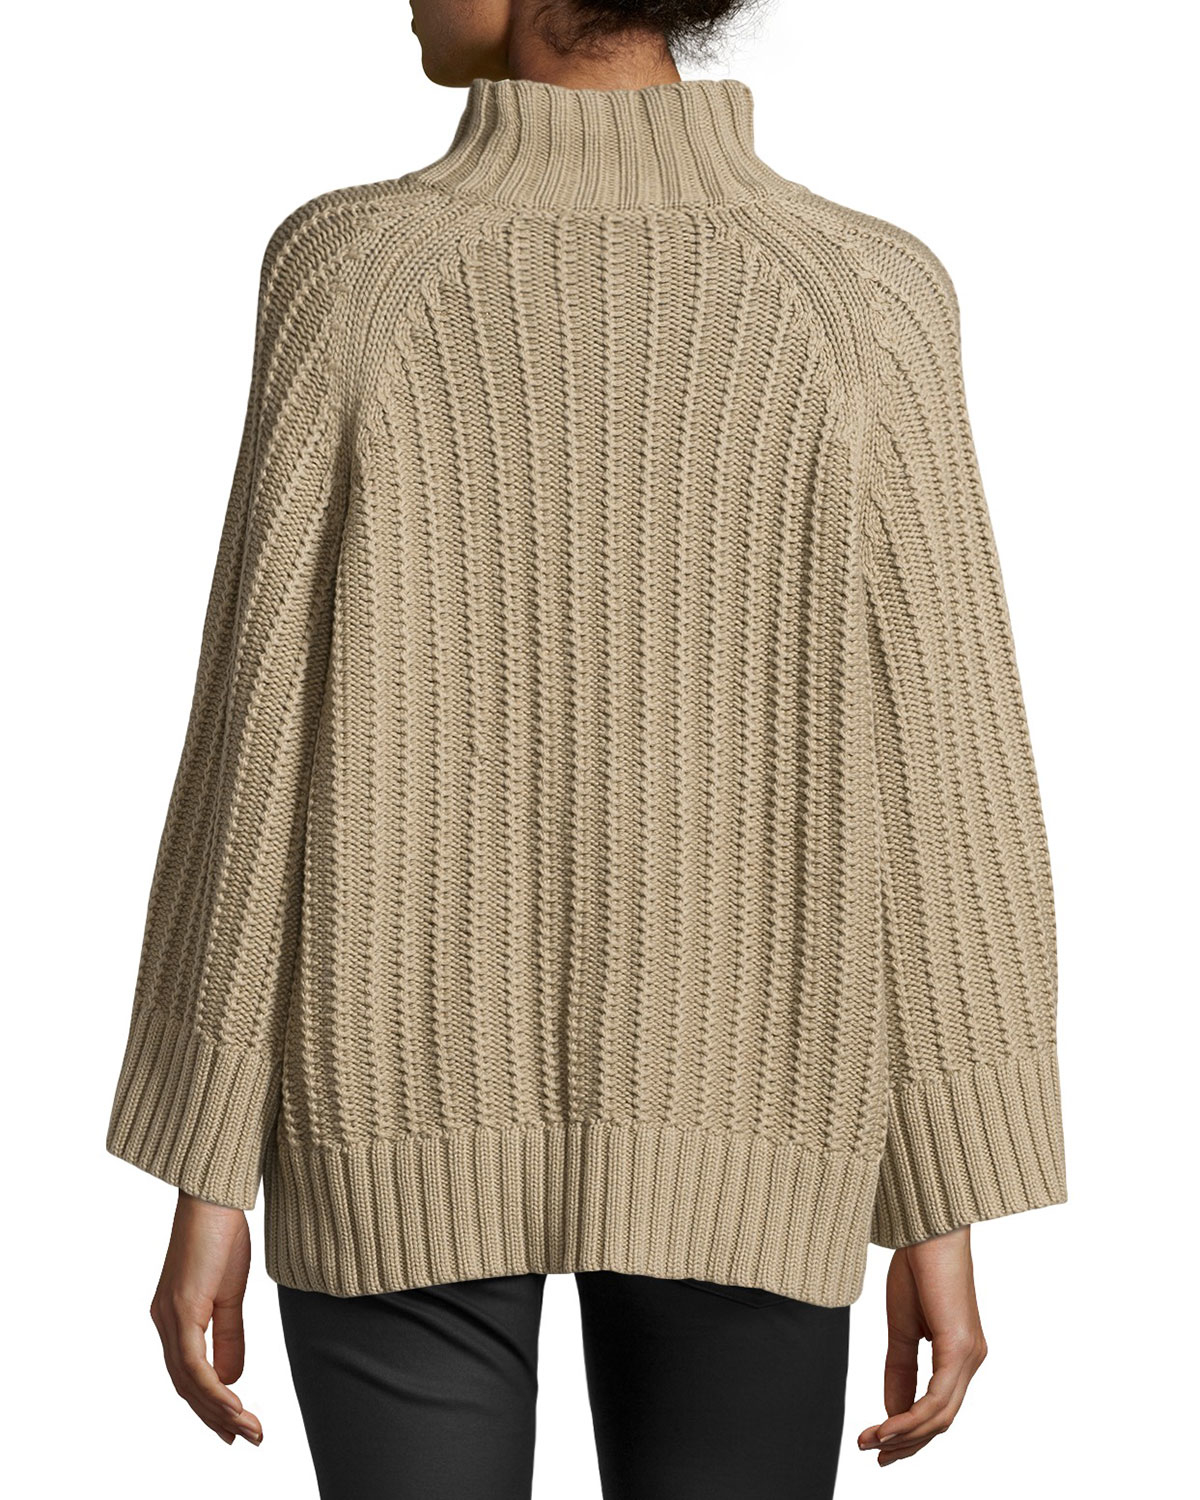 Michael kors Ribbed Shaker-knit Sweater in Natural | Lyst